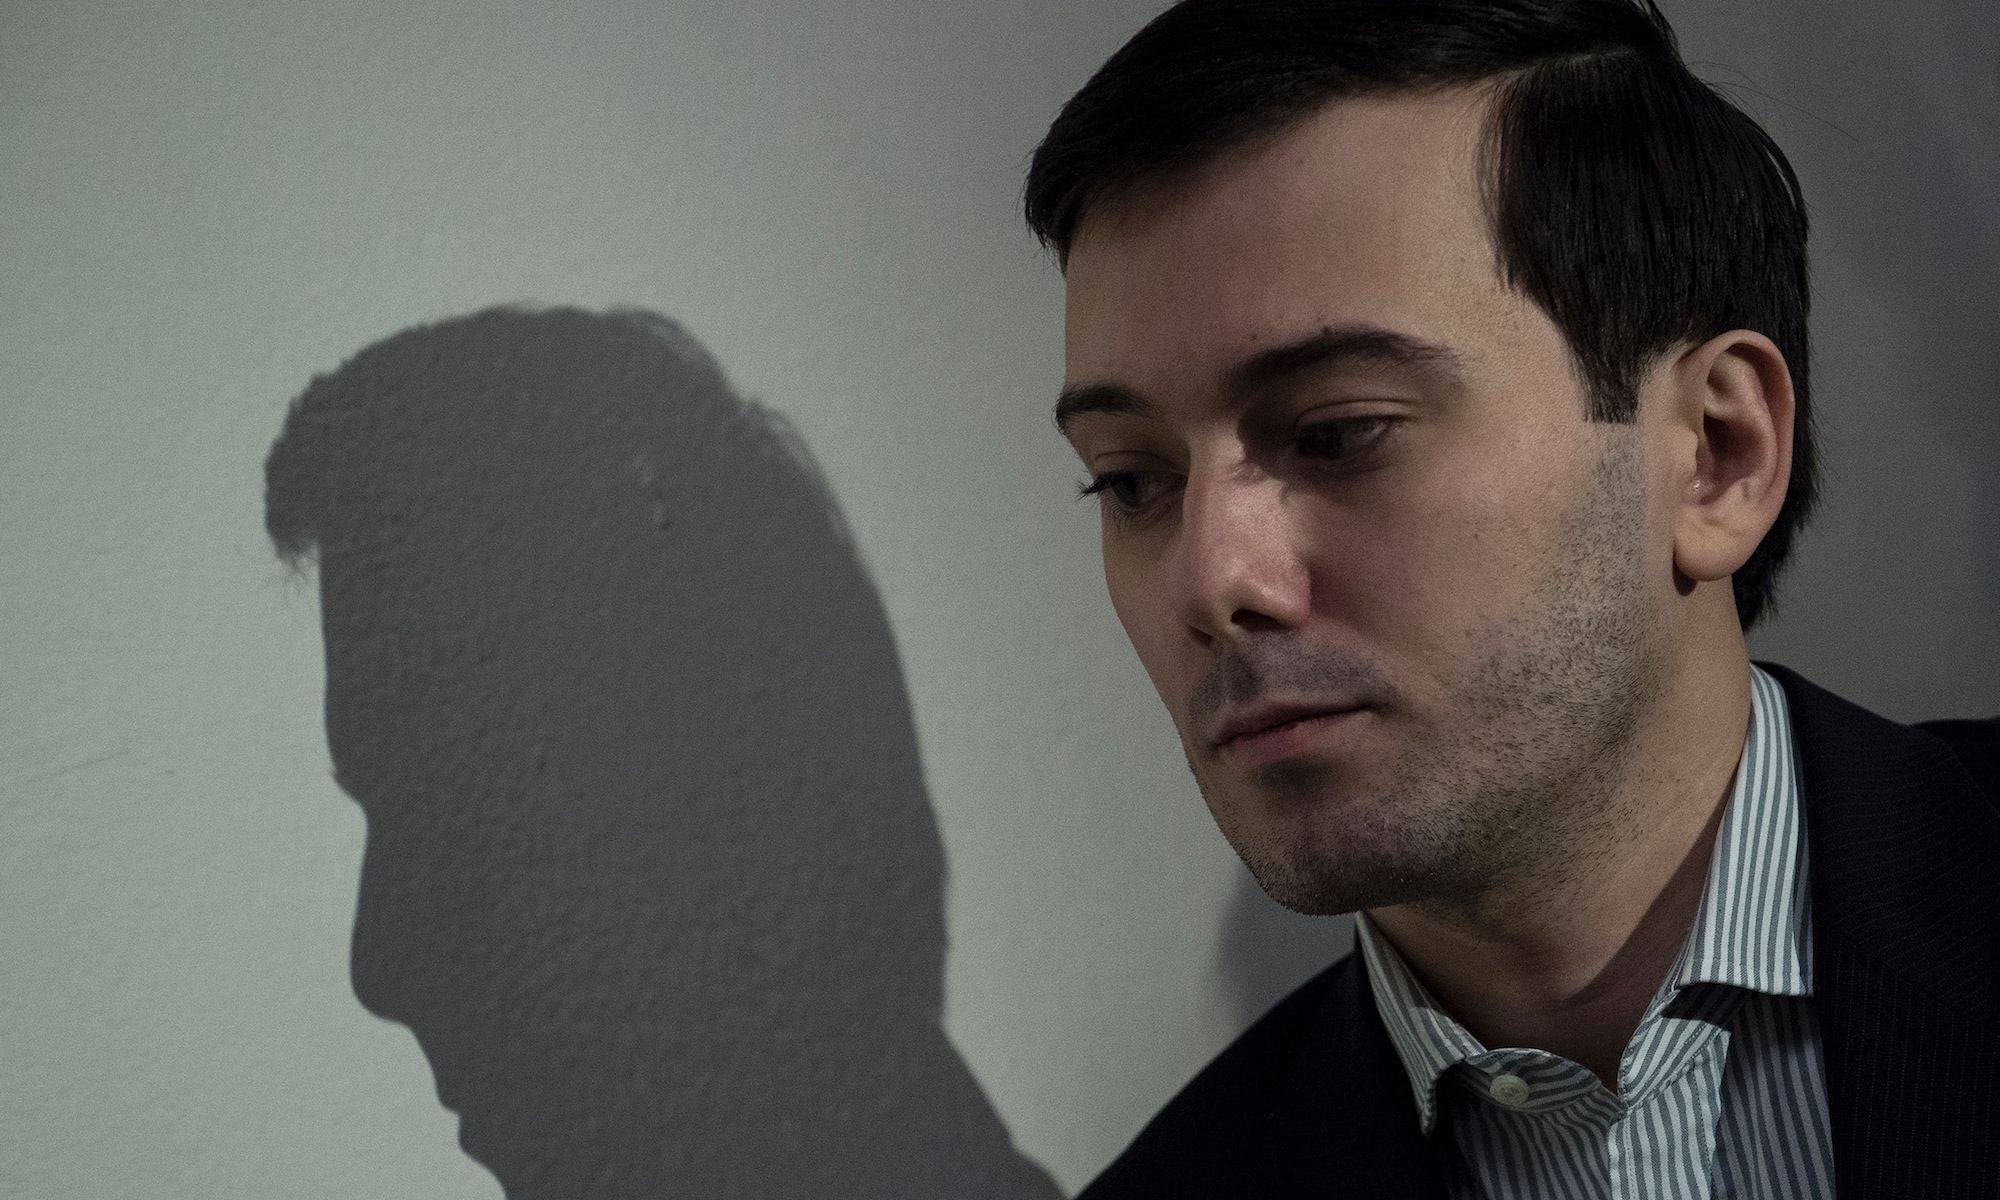 Martin Shkreli leaves after invoking his Fifth Amendment rights during a hearing of the House Oversight and Government Reform Committee on Capitol Hill February 4, 2016 in Washington, DC.